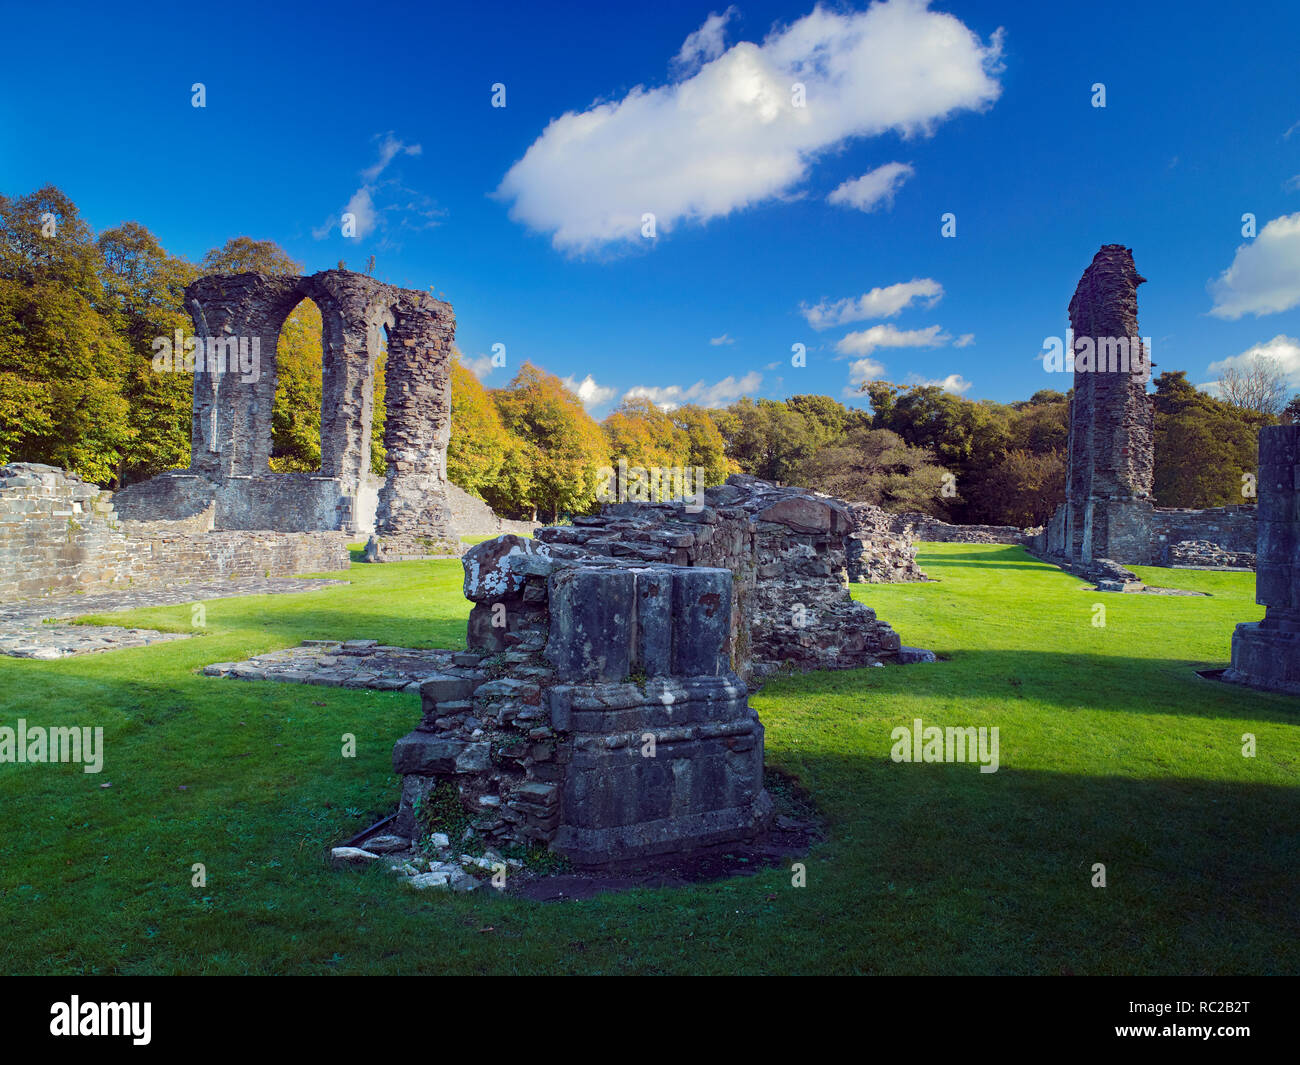 An autumn view of the ruins of the historic Neath Abbey, Wales, UK Stock Photo